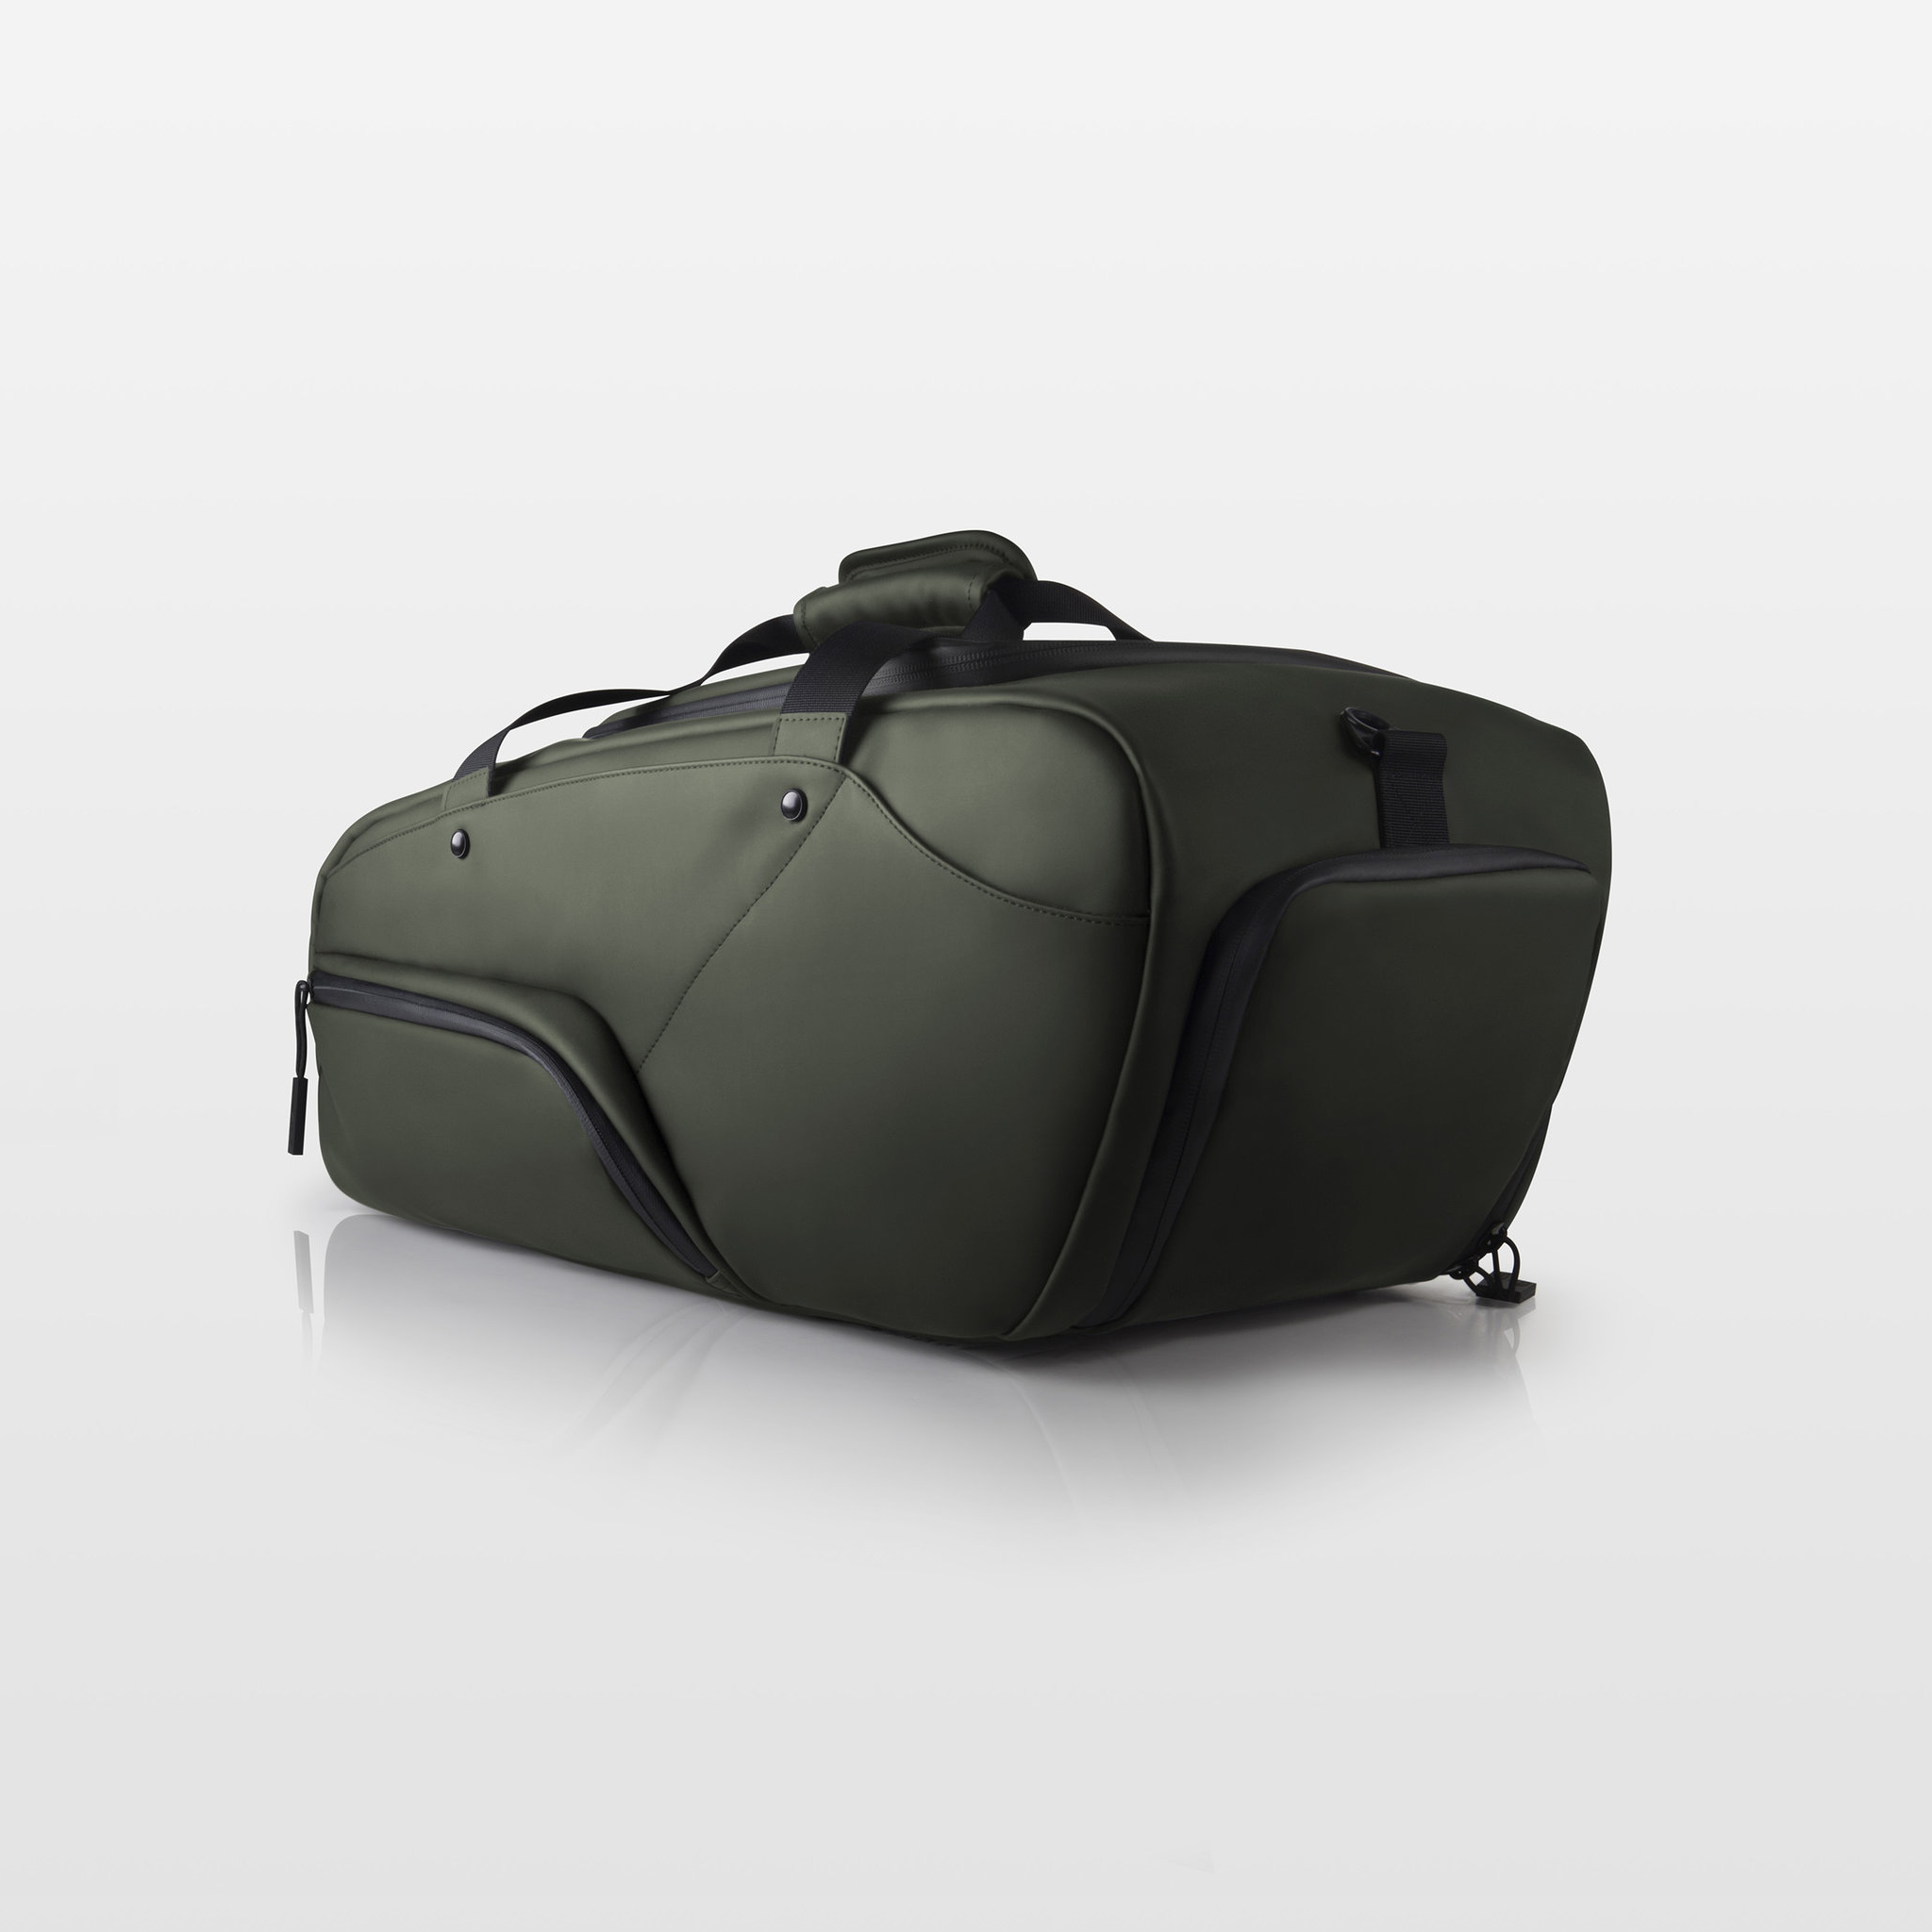 Duffle Travel Bag - Best Lightweight Carry On Luggage